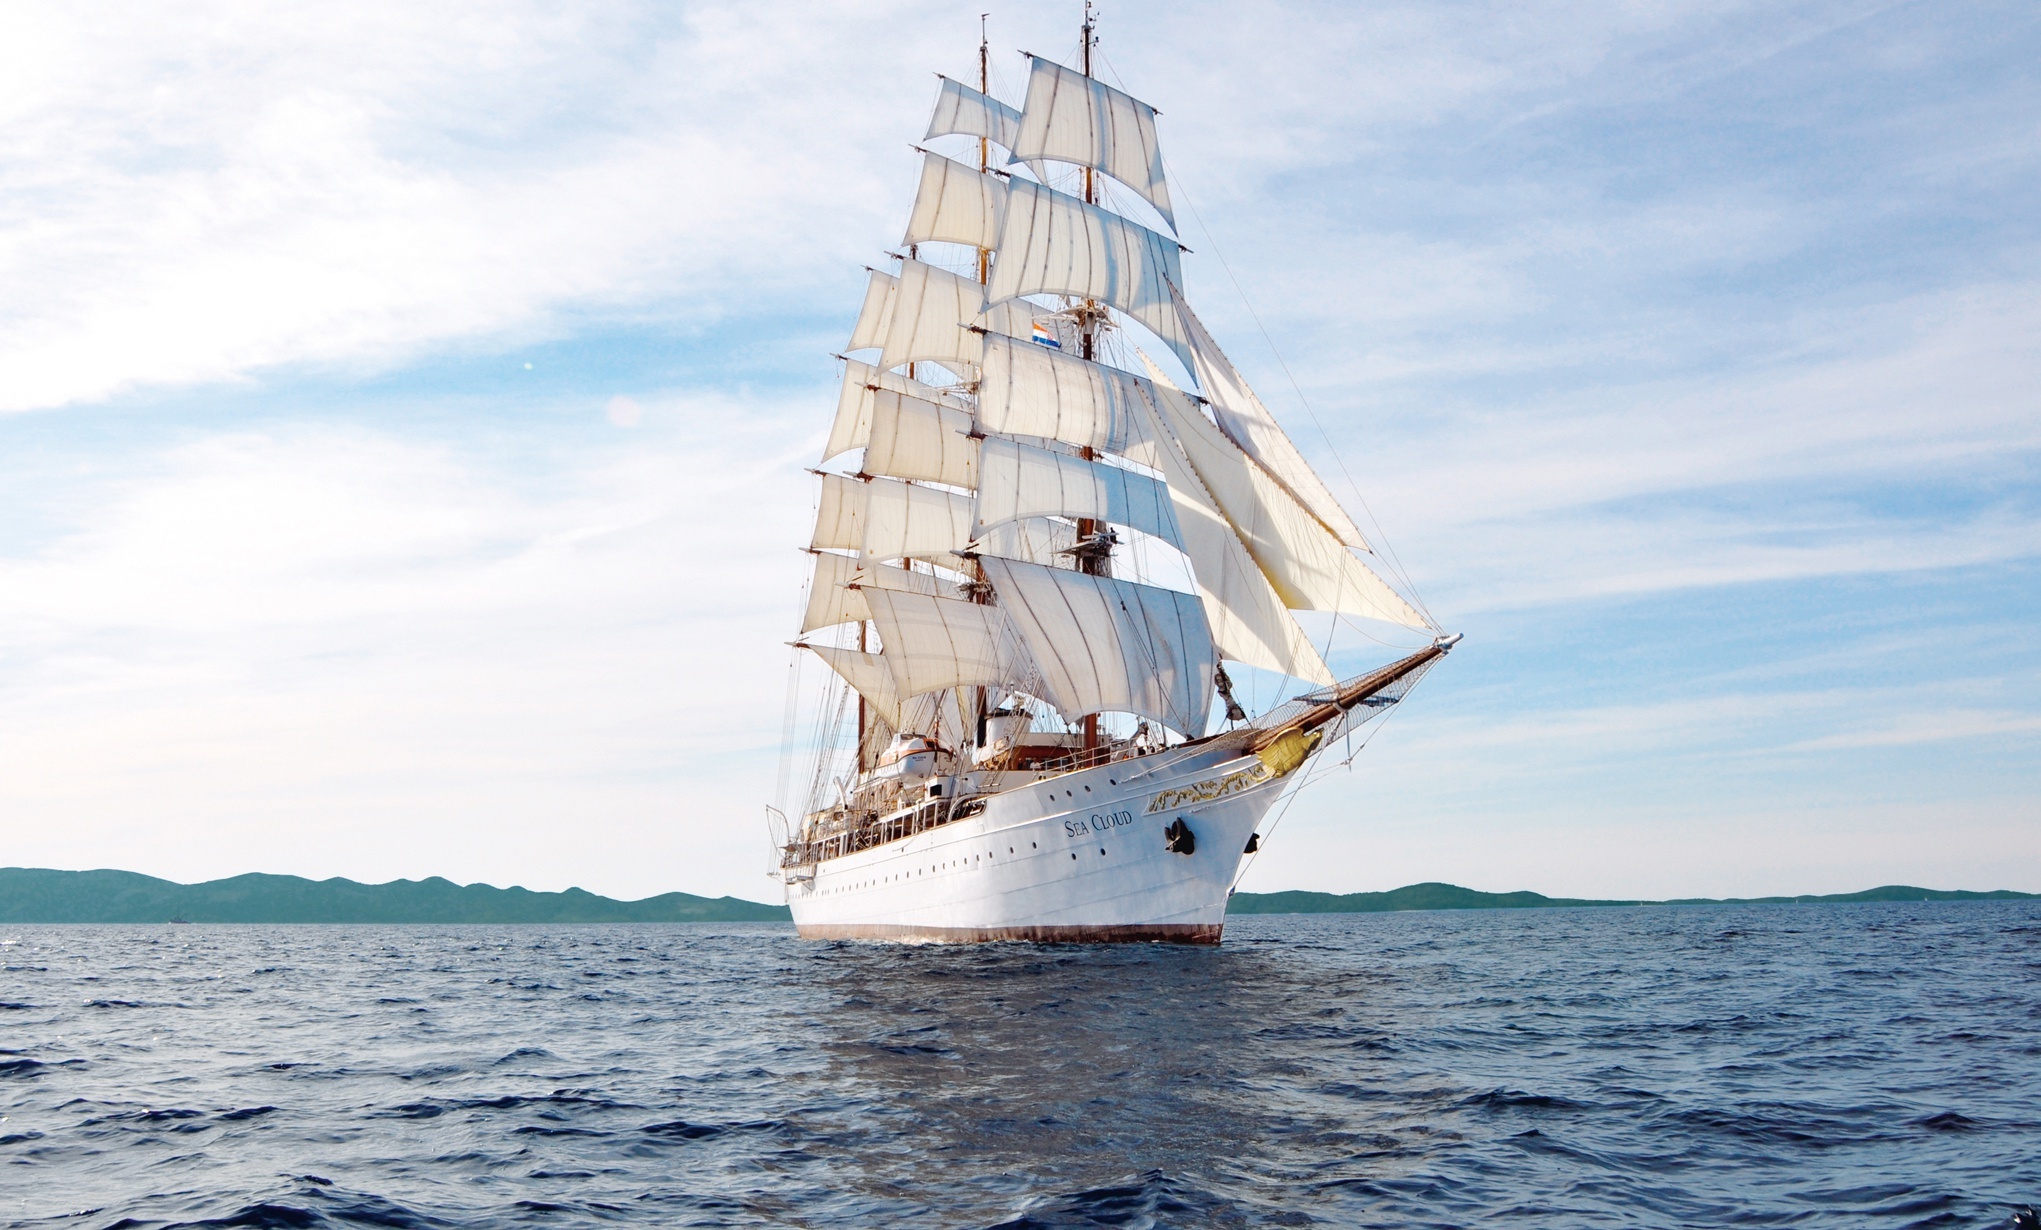 Windjammer: The 360-foot barque Sea Cloud, One of the finest sailing vessels operating today. 2050x1230 HD Wallpaper.